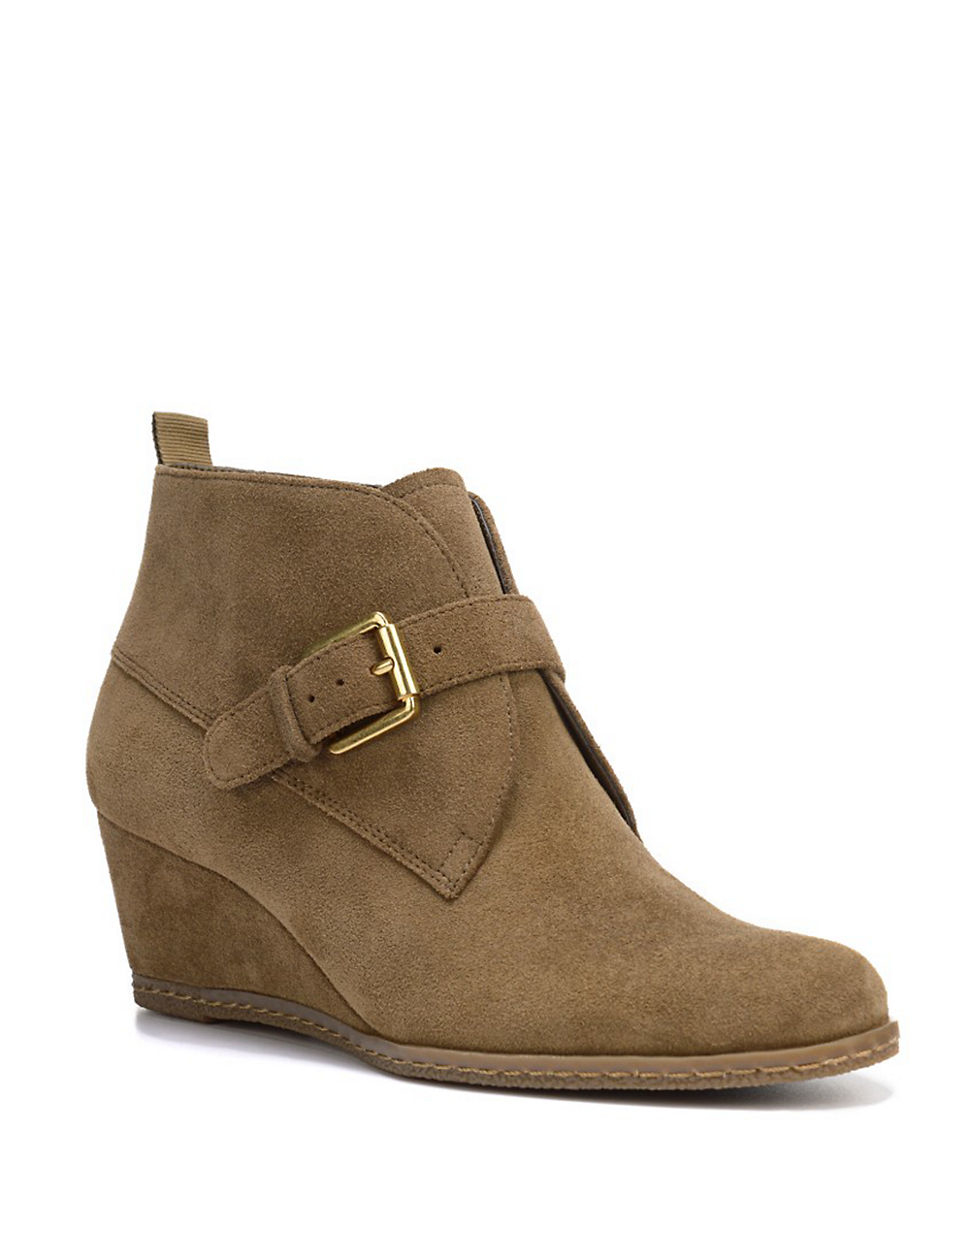 Franco sarto Amerosa Suede Wedge Ankle Boots in Green | Lyst